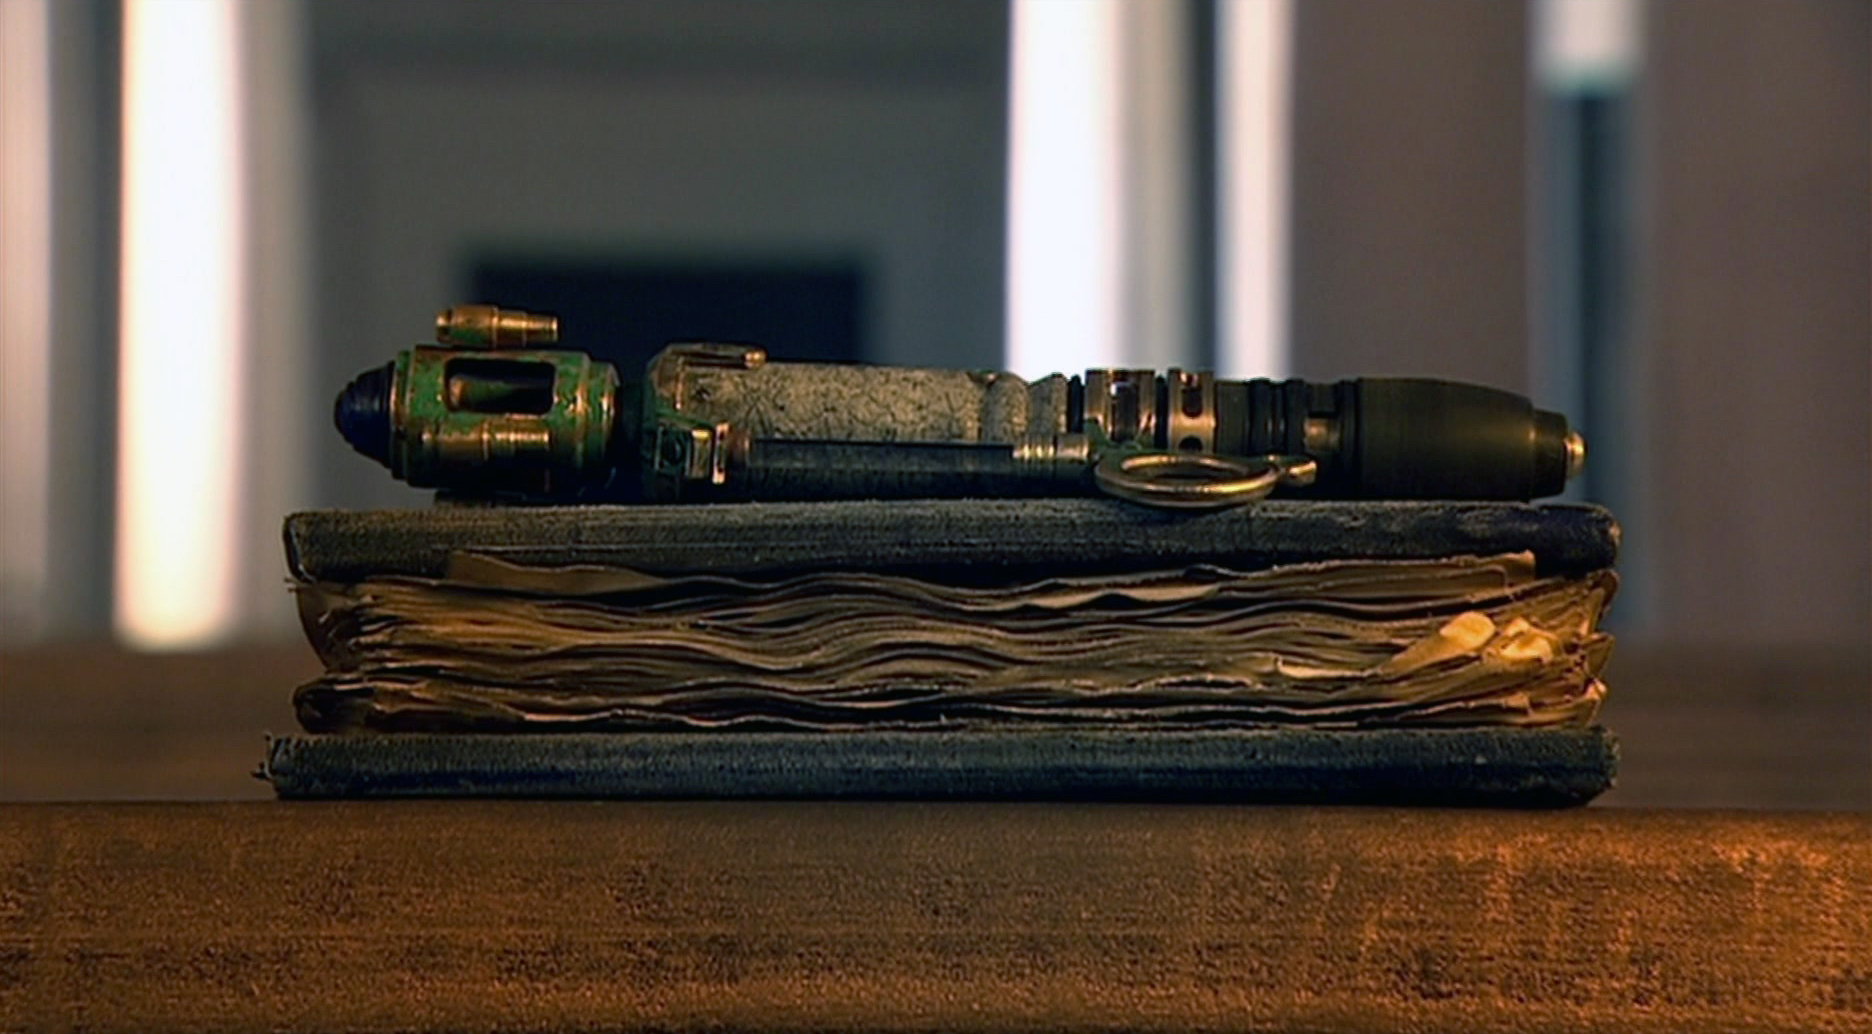 River Song's diary with her sonic set on top.